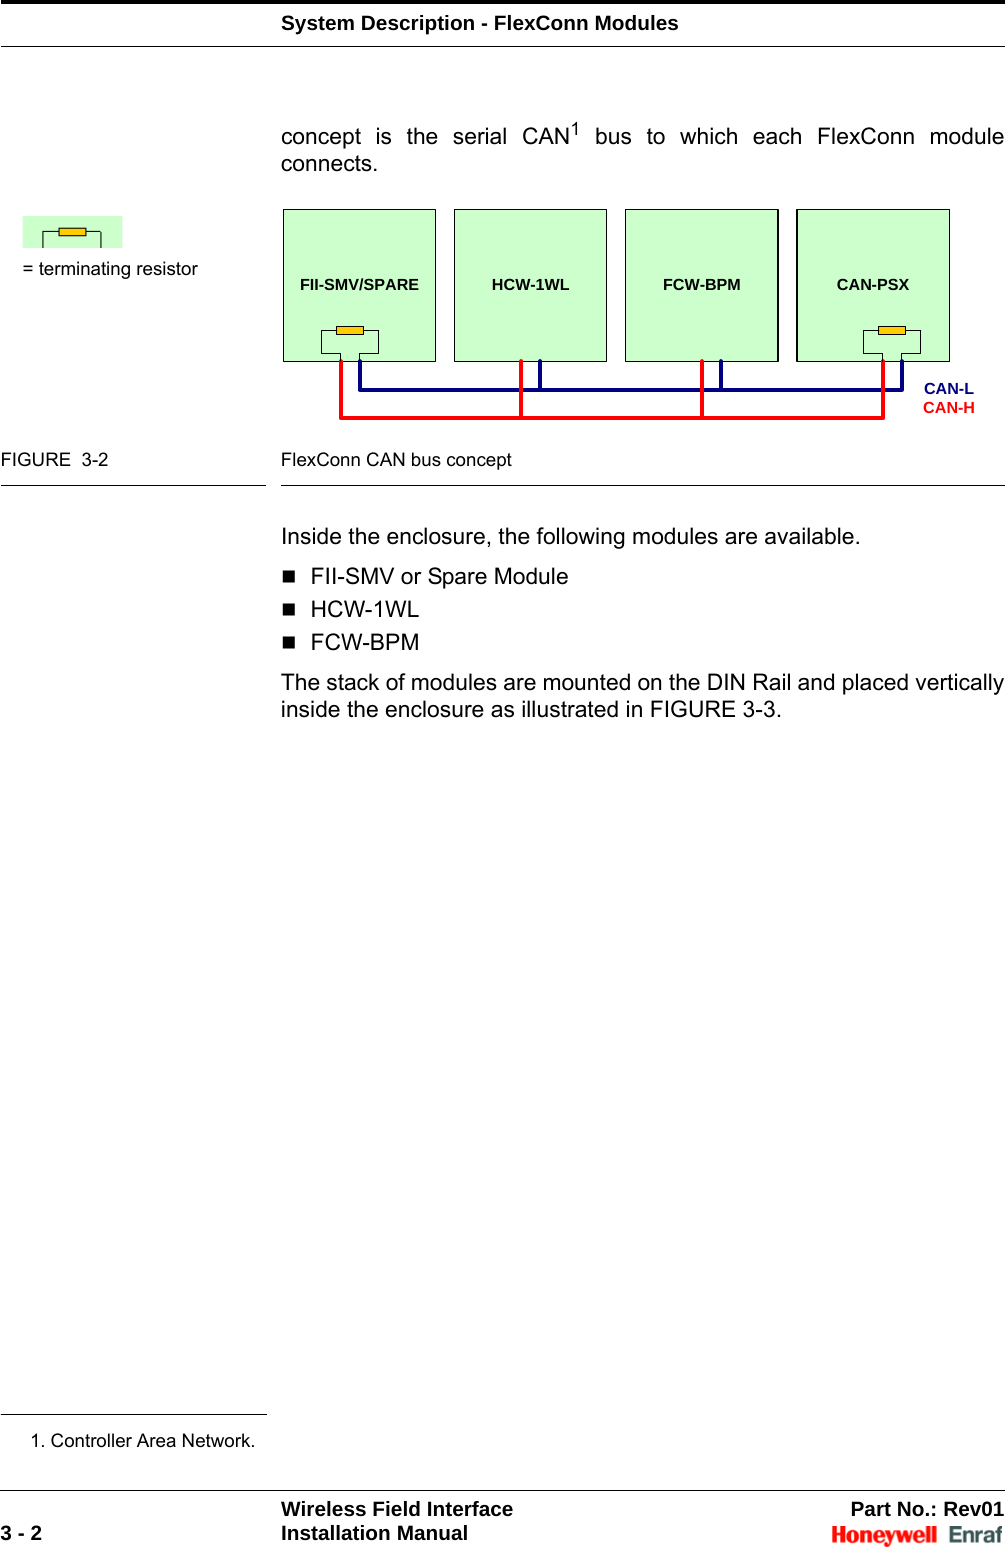 System Description - FlexConn ModulesWireless Field Interface Part No.: Rev013 - 2 Installation Manualconcept is the serial CAN1 bus to which each FlexConn module connects.FIGURE  3-2 FlexConn CAN bus conceptInside the enclosure, the following modules are available.FII-SMV or Spare ModuleHCW-1WLFCW-BPMThe stack of modules are mounted on the DIN Rail and placed vertically inside the enclosure as illustrated in FIGURE 3-3.1. Controller Area Network.FII-SMV/SPARE HCW-1WL  FCW-BPM CAN-PSXCAN-LCAN-H= terminating resistor